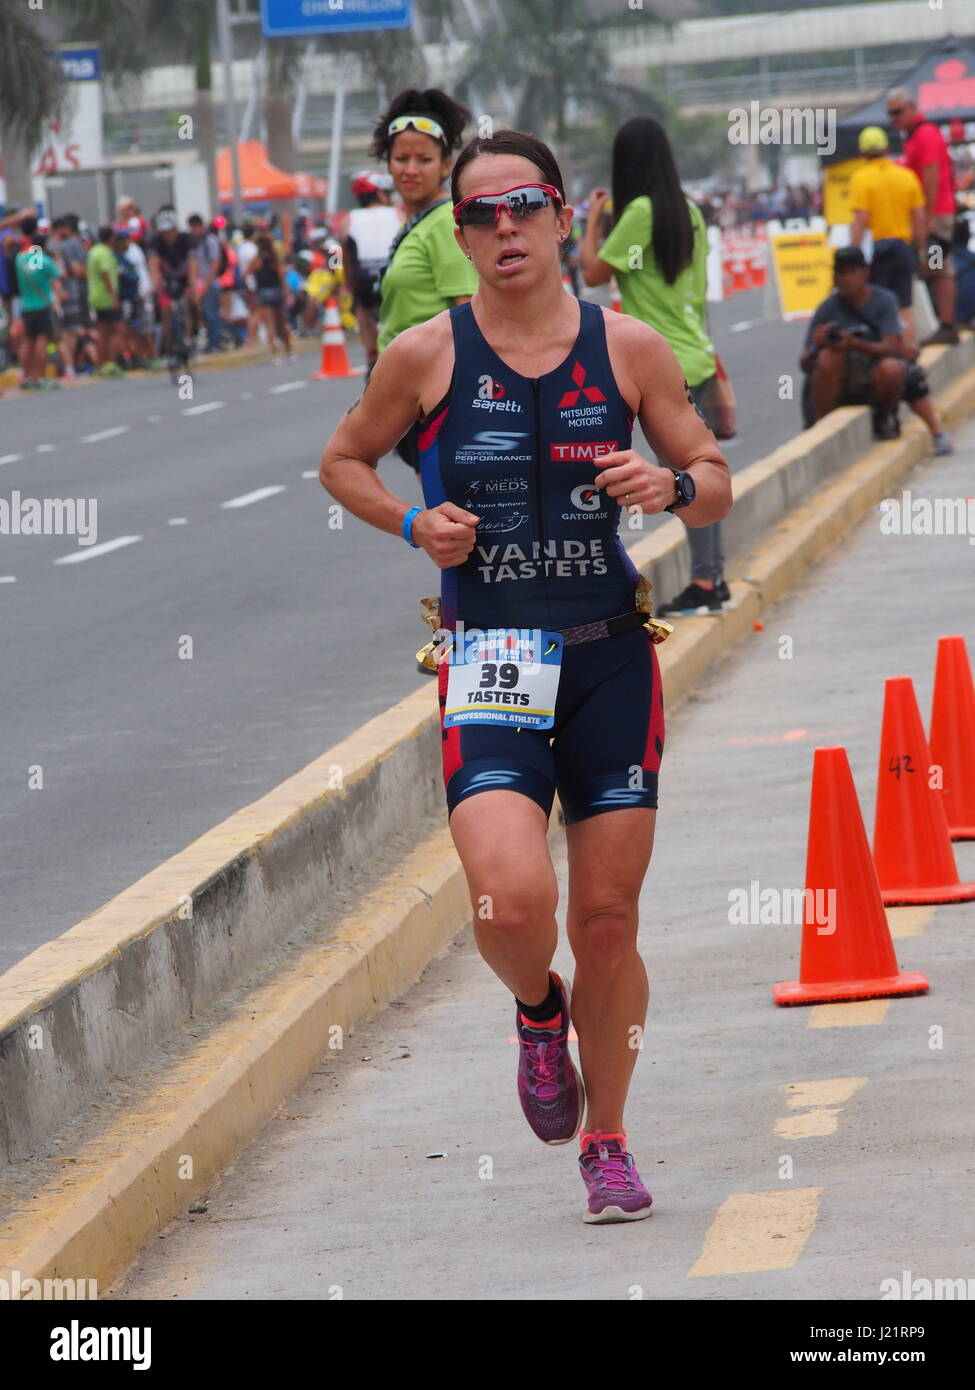 Pamela Tastets (Chile) running. Over 1653 athletes ran in the IRONMAN 70.3 Peru race at Agua Dulce beach in Chorrillos town, Lima. Stock Photo